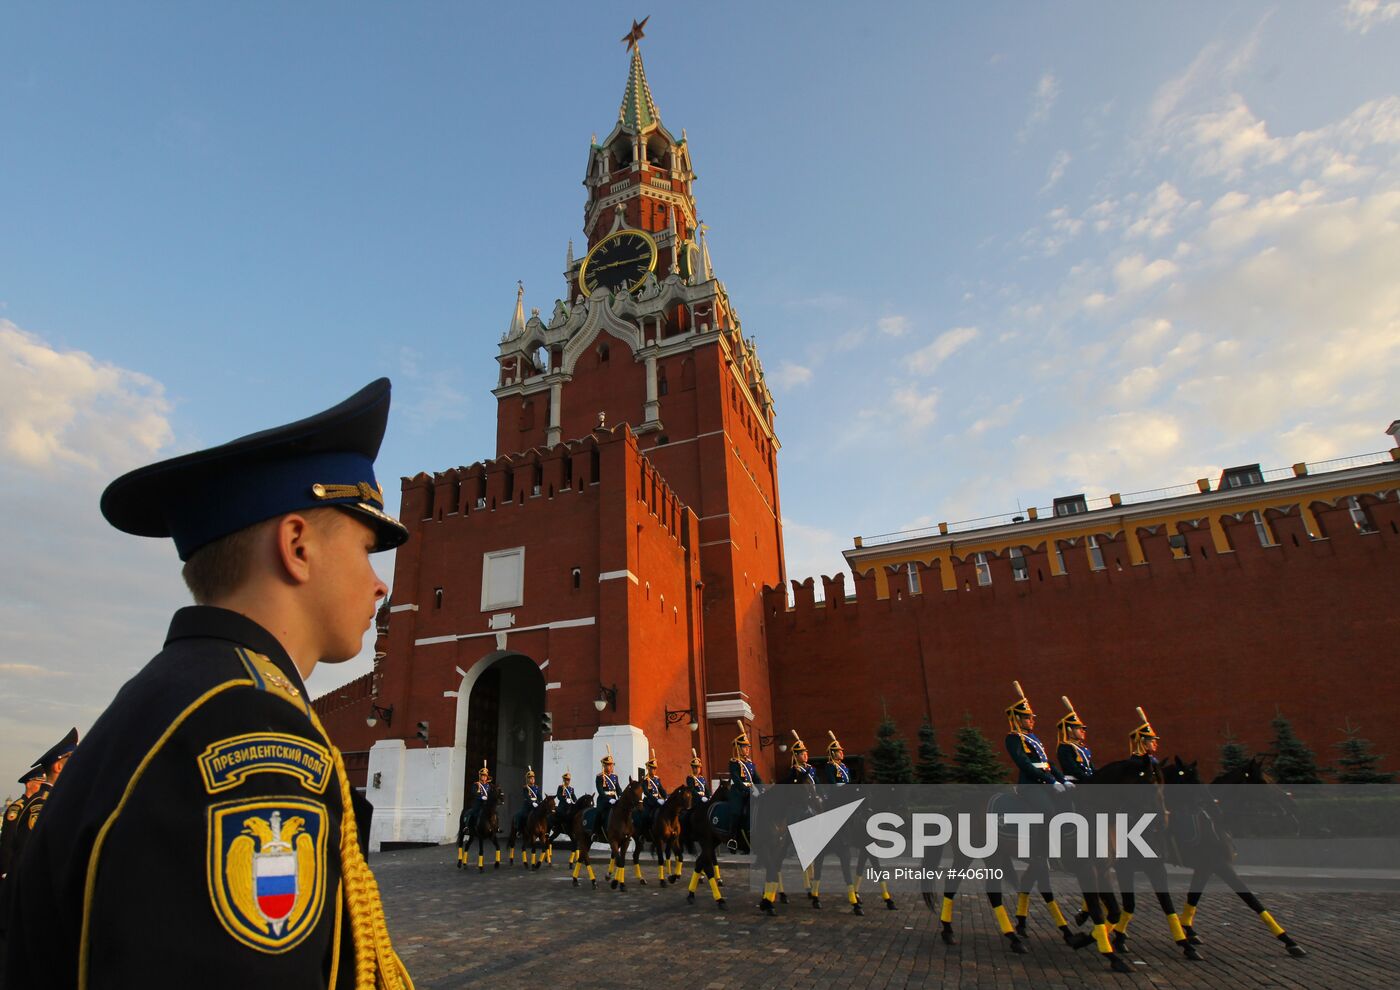 Changing of the guard ceremony on Red Square